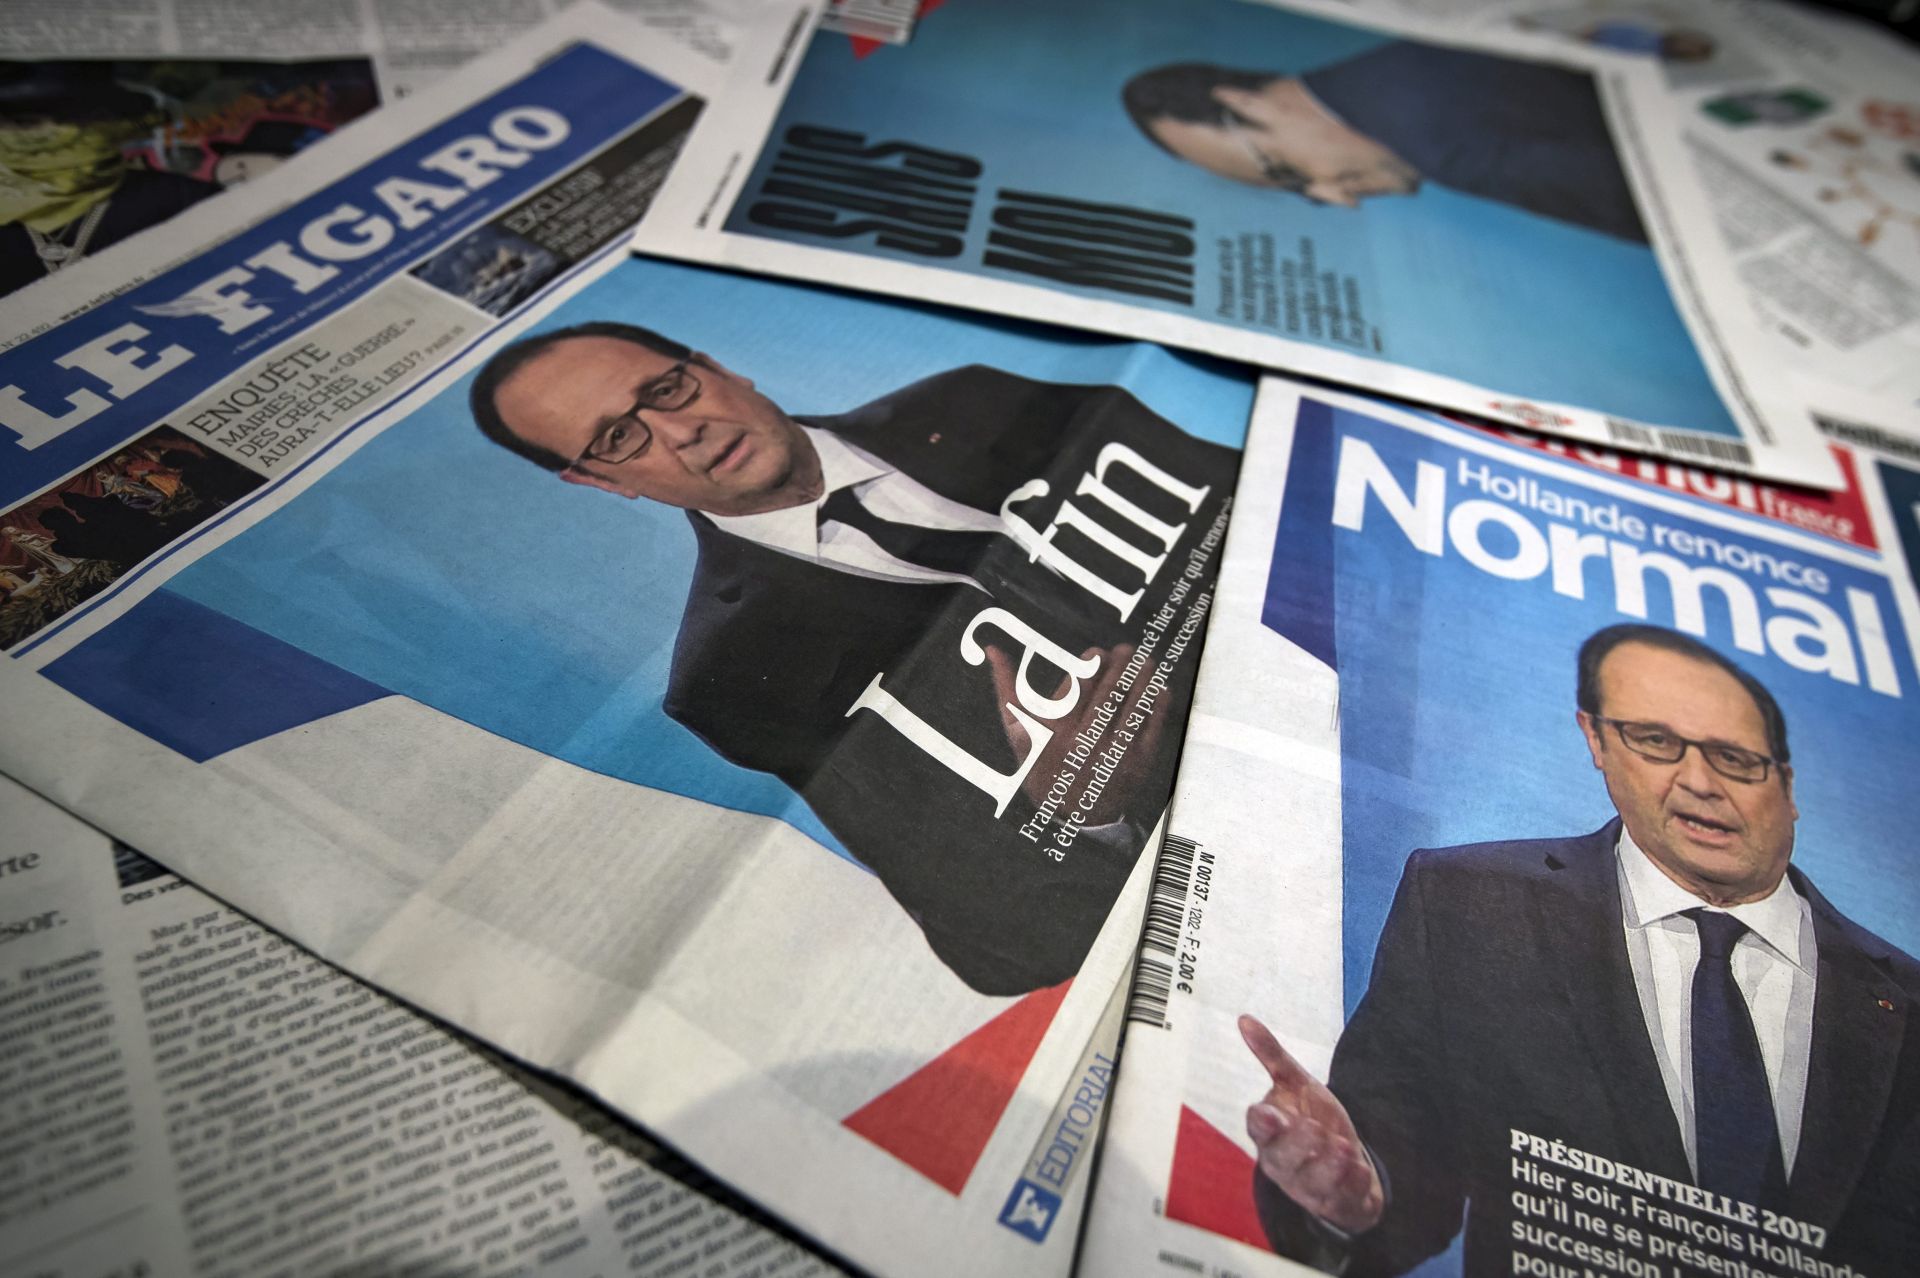 epa05656147 A photo illustration of French daily newspapers bearing French President Francois Hollande on their frontpages, in Paris, France, 02 December 2016. Hollande on 01 December 2016 announced he will not run for re-election as French president.  EPA/IAN LANGSDON